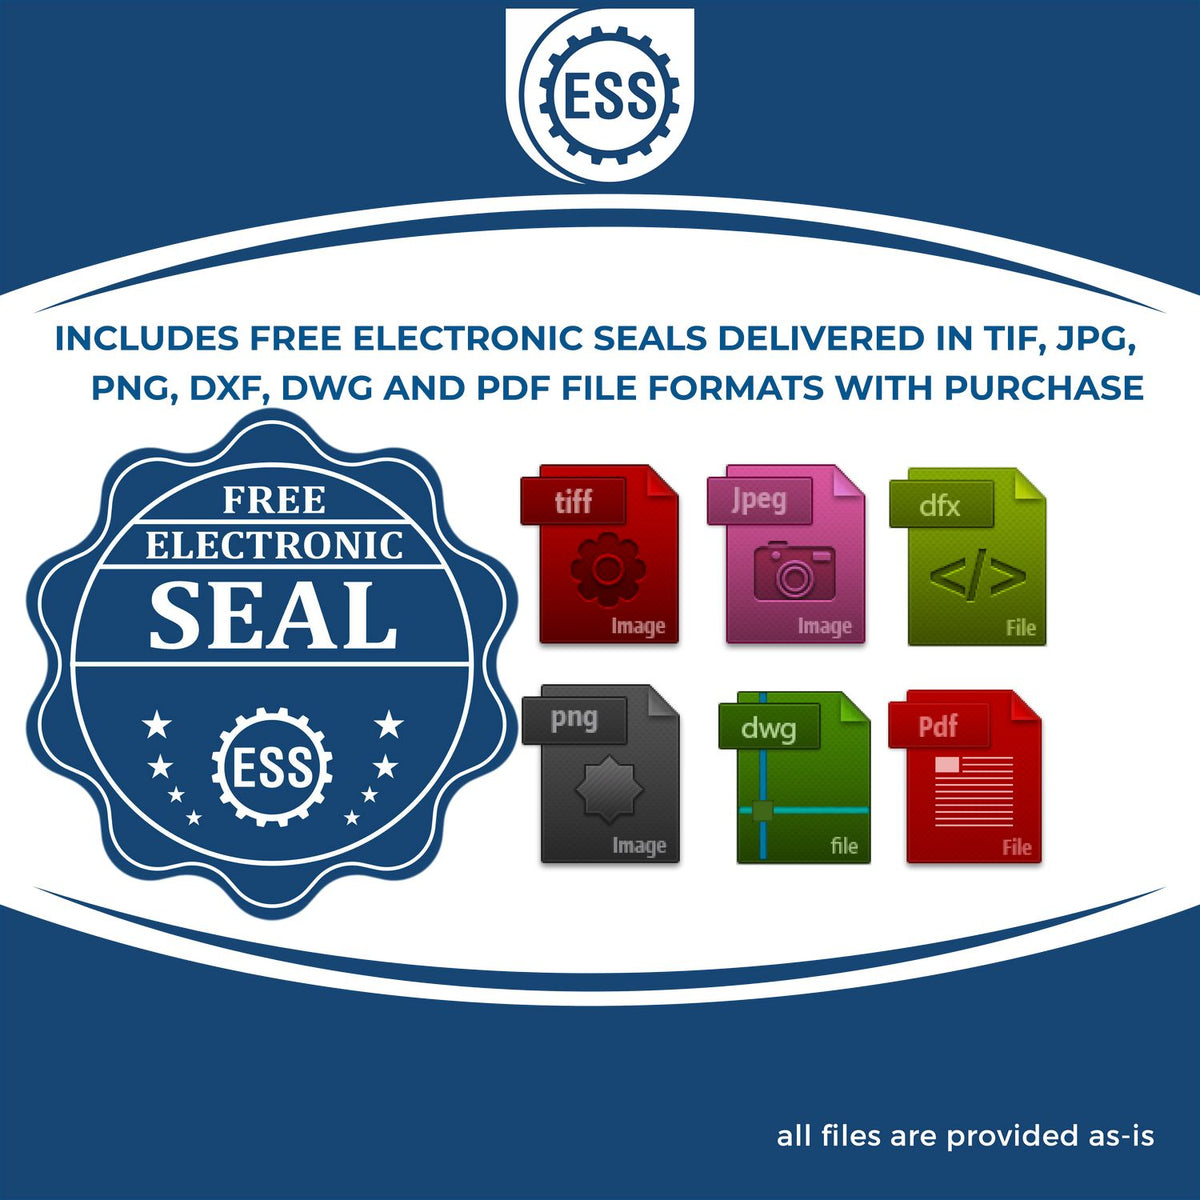 An infographic for the free electronic seal for the Premium MaxLight Pre-Inked Arizona Engineering Stamp illustrating the different file type icons such as DXF, DWG, TIF, JPG and PNG.